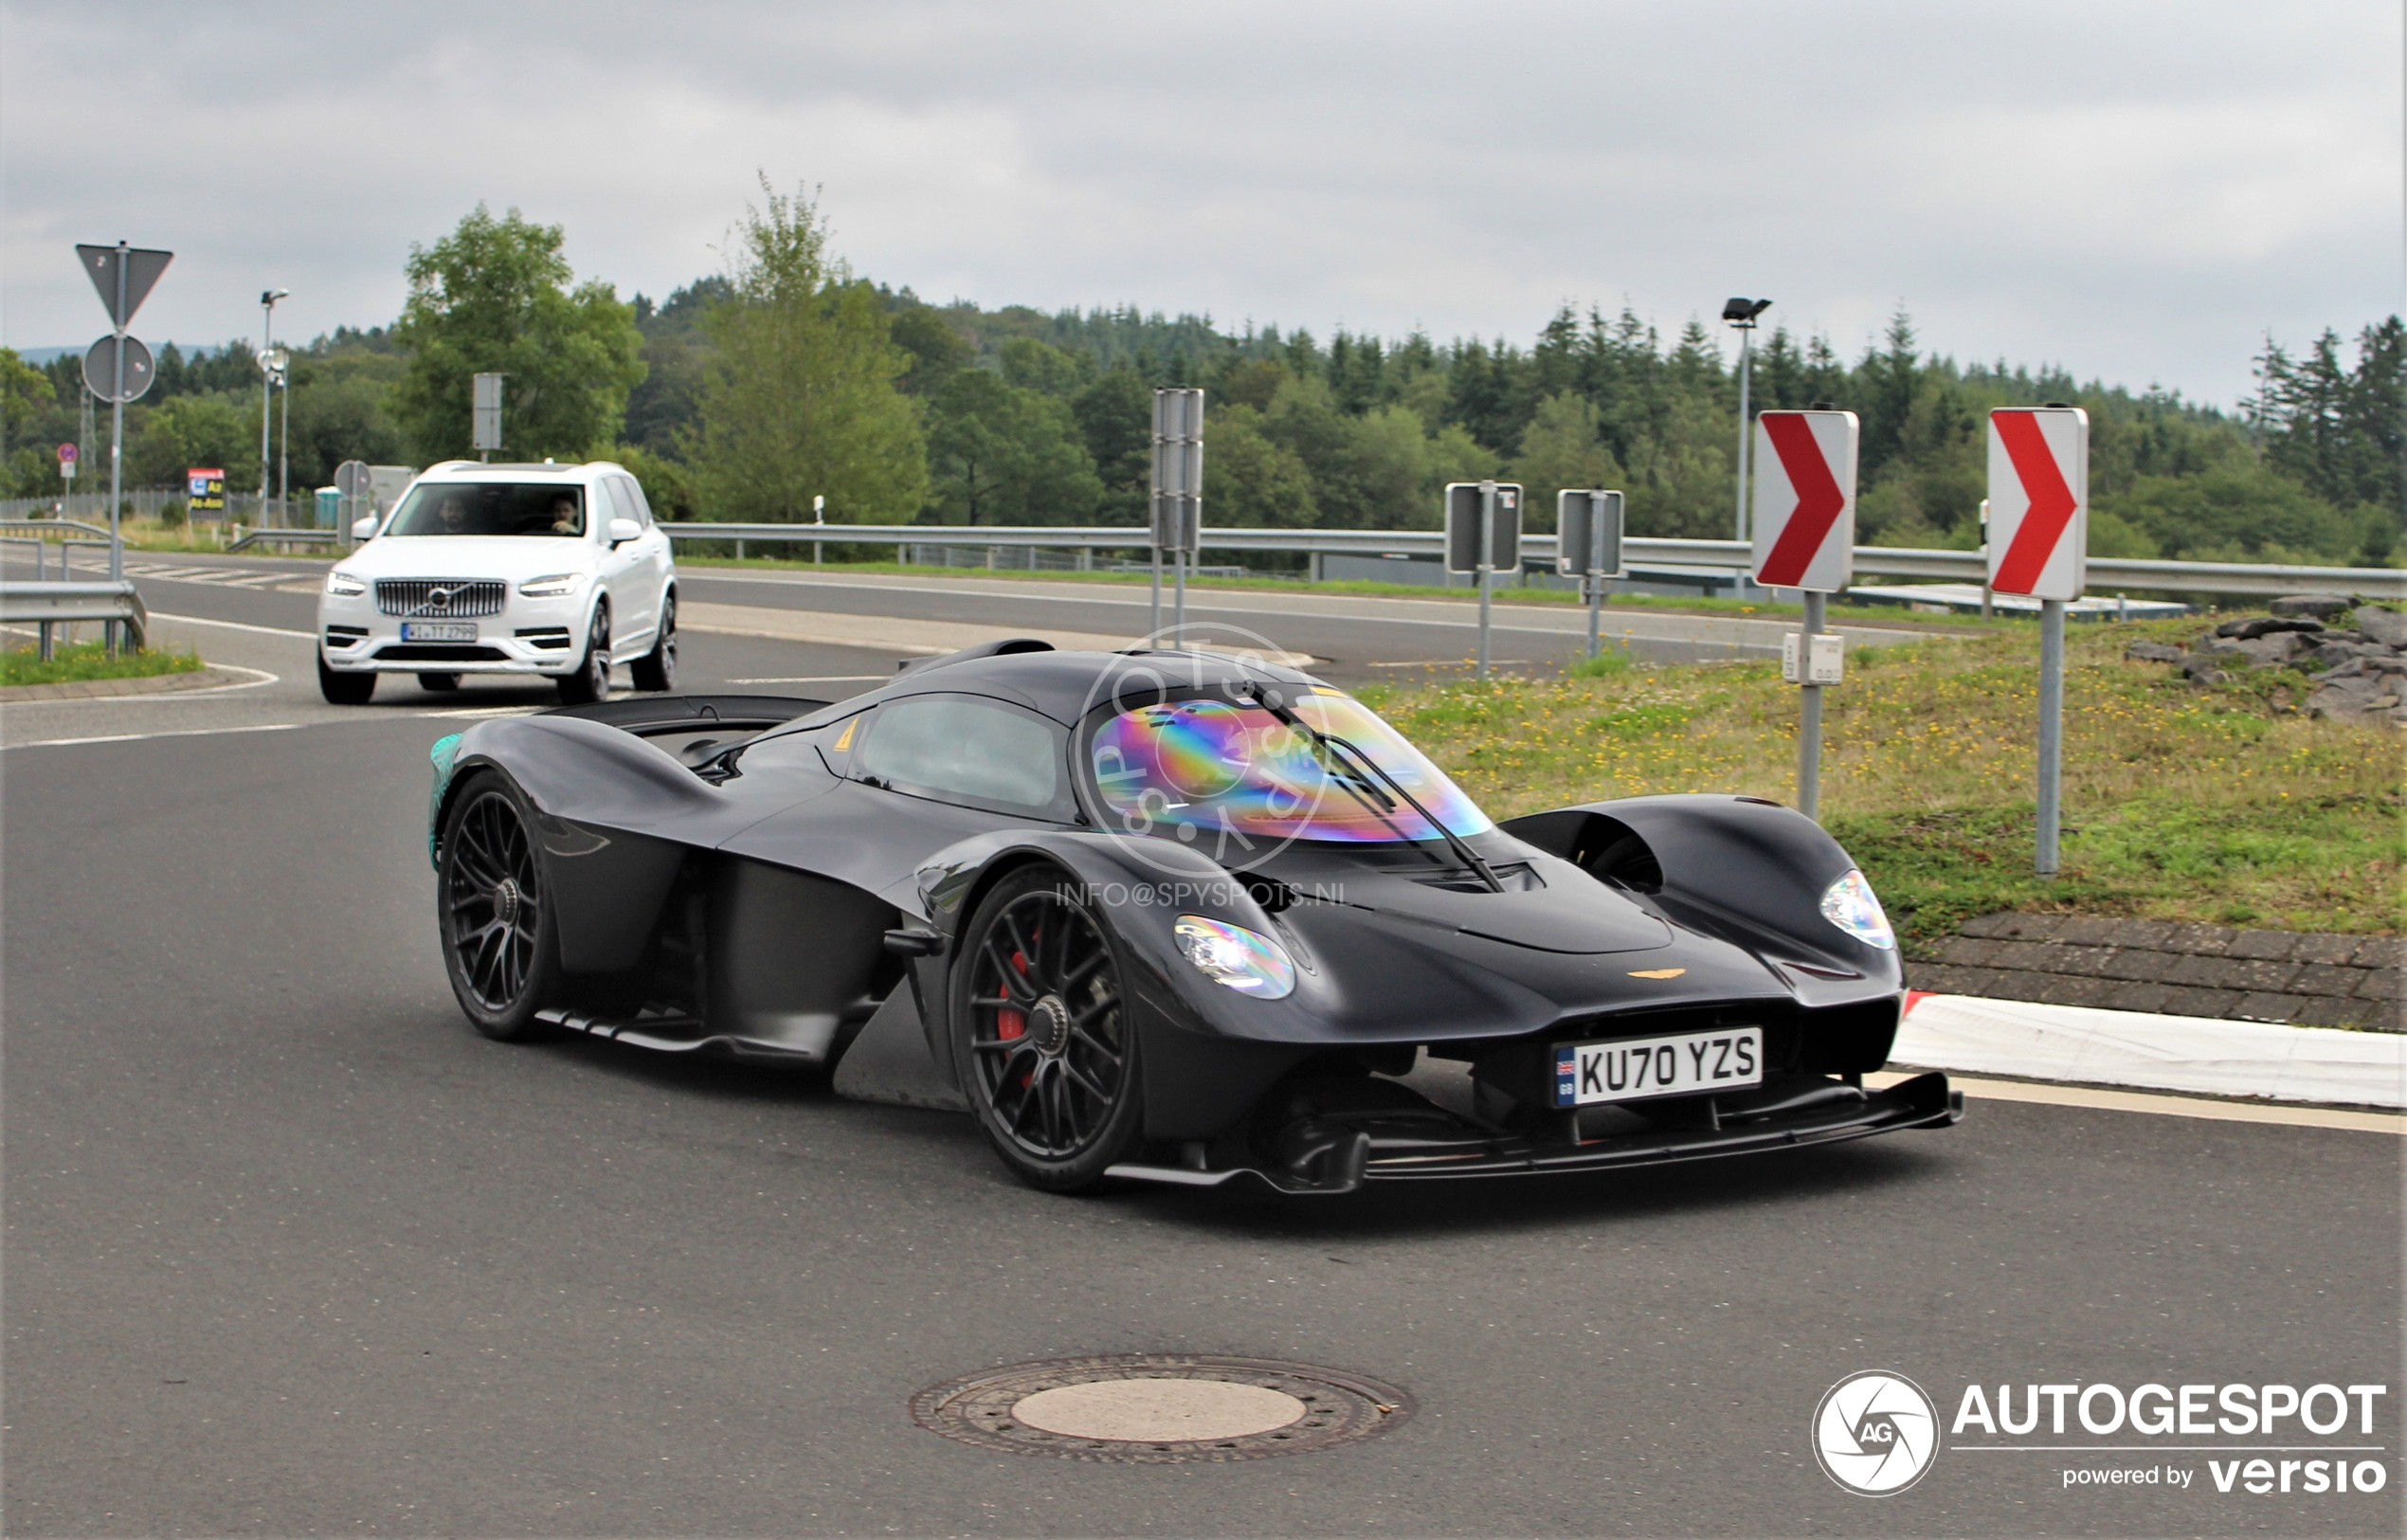 A Valkyrie test vehicle is discovered at the Nürburgring